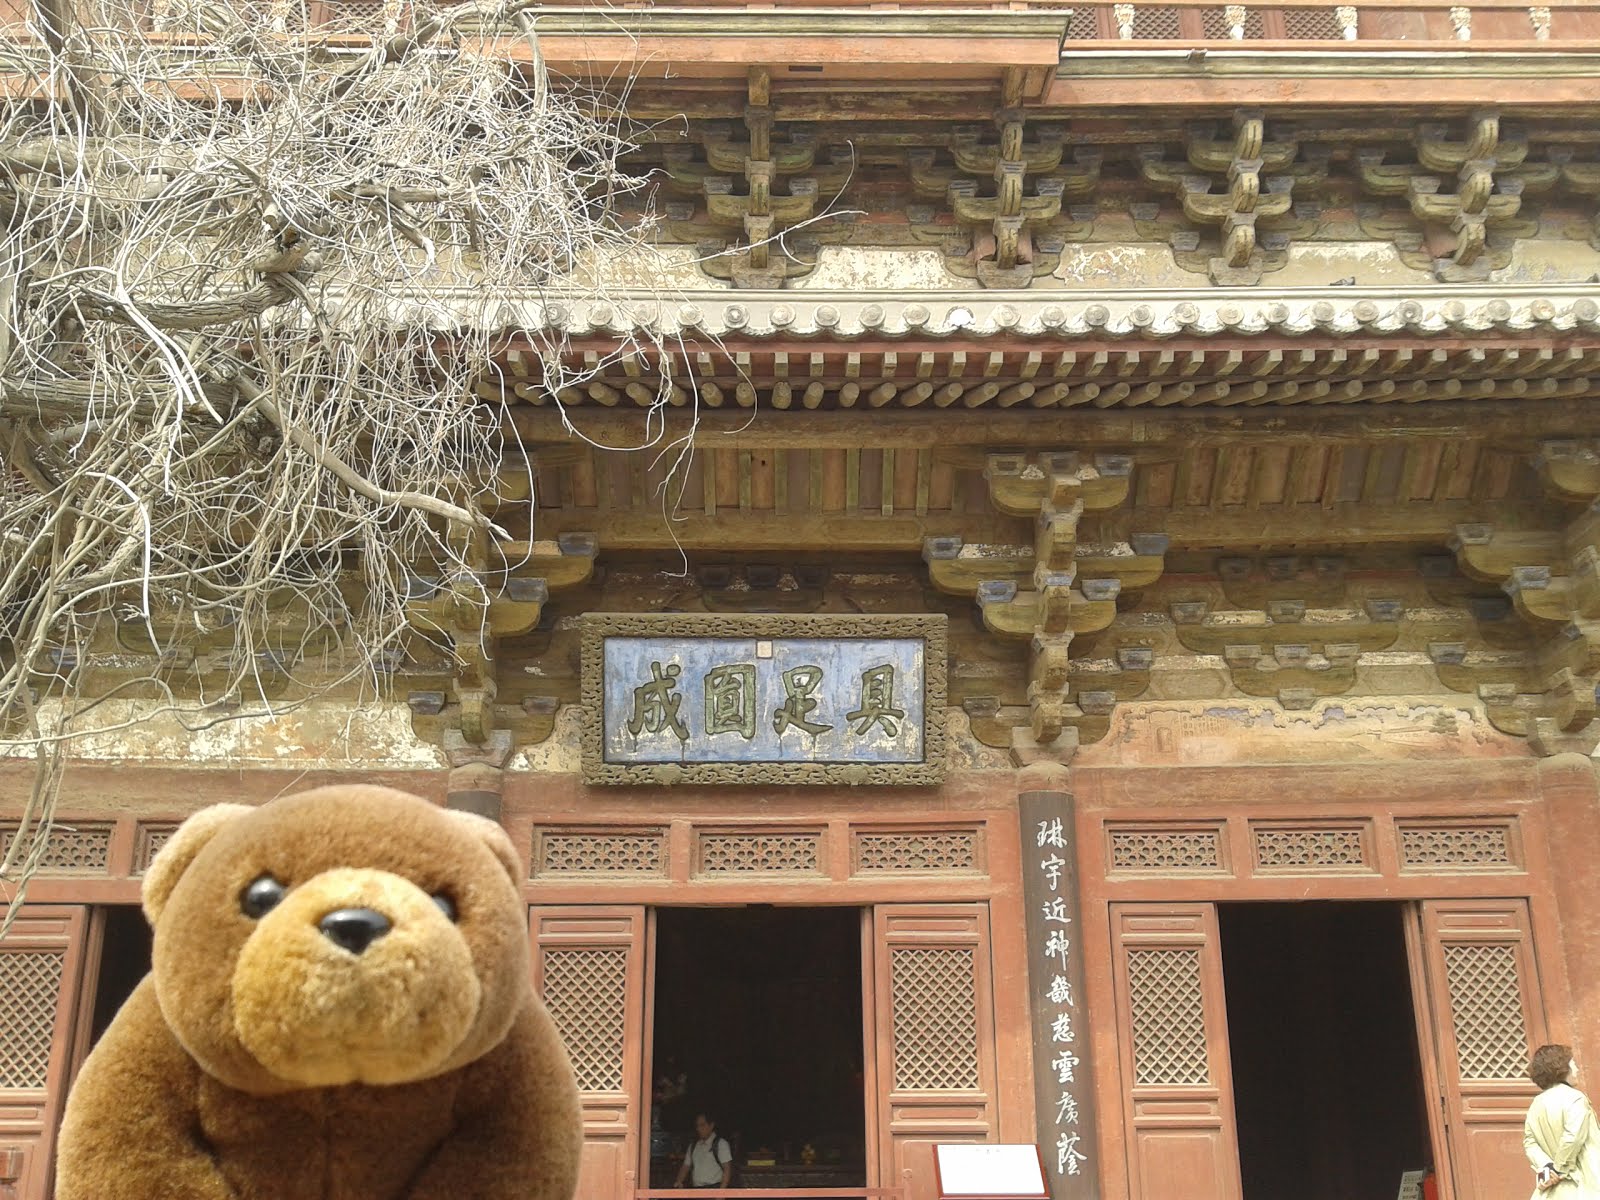 Teddy in front of Dule Temple, China